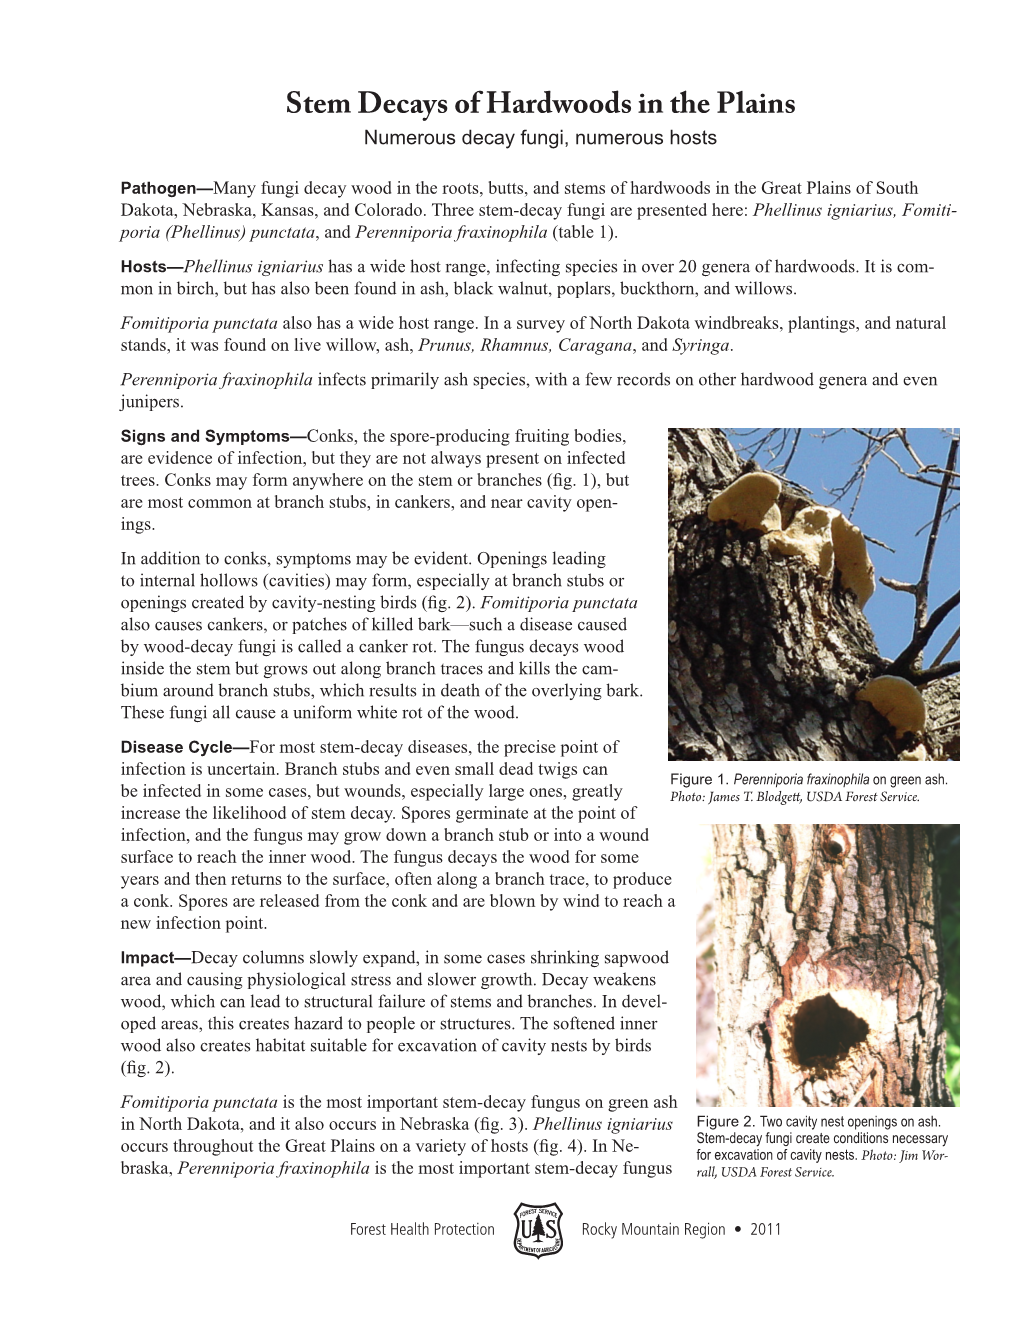 Stem Decays of Hardwoods in the Plains Numerous Decay Fungi, Numerous Hosts